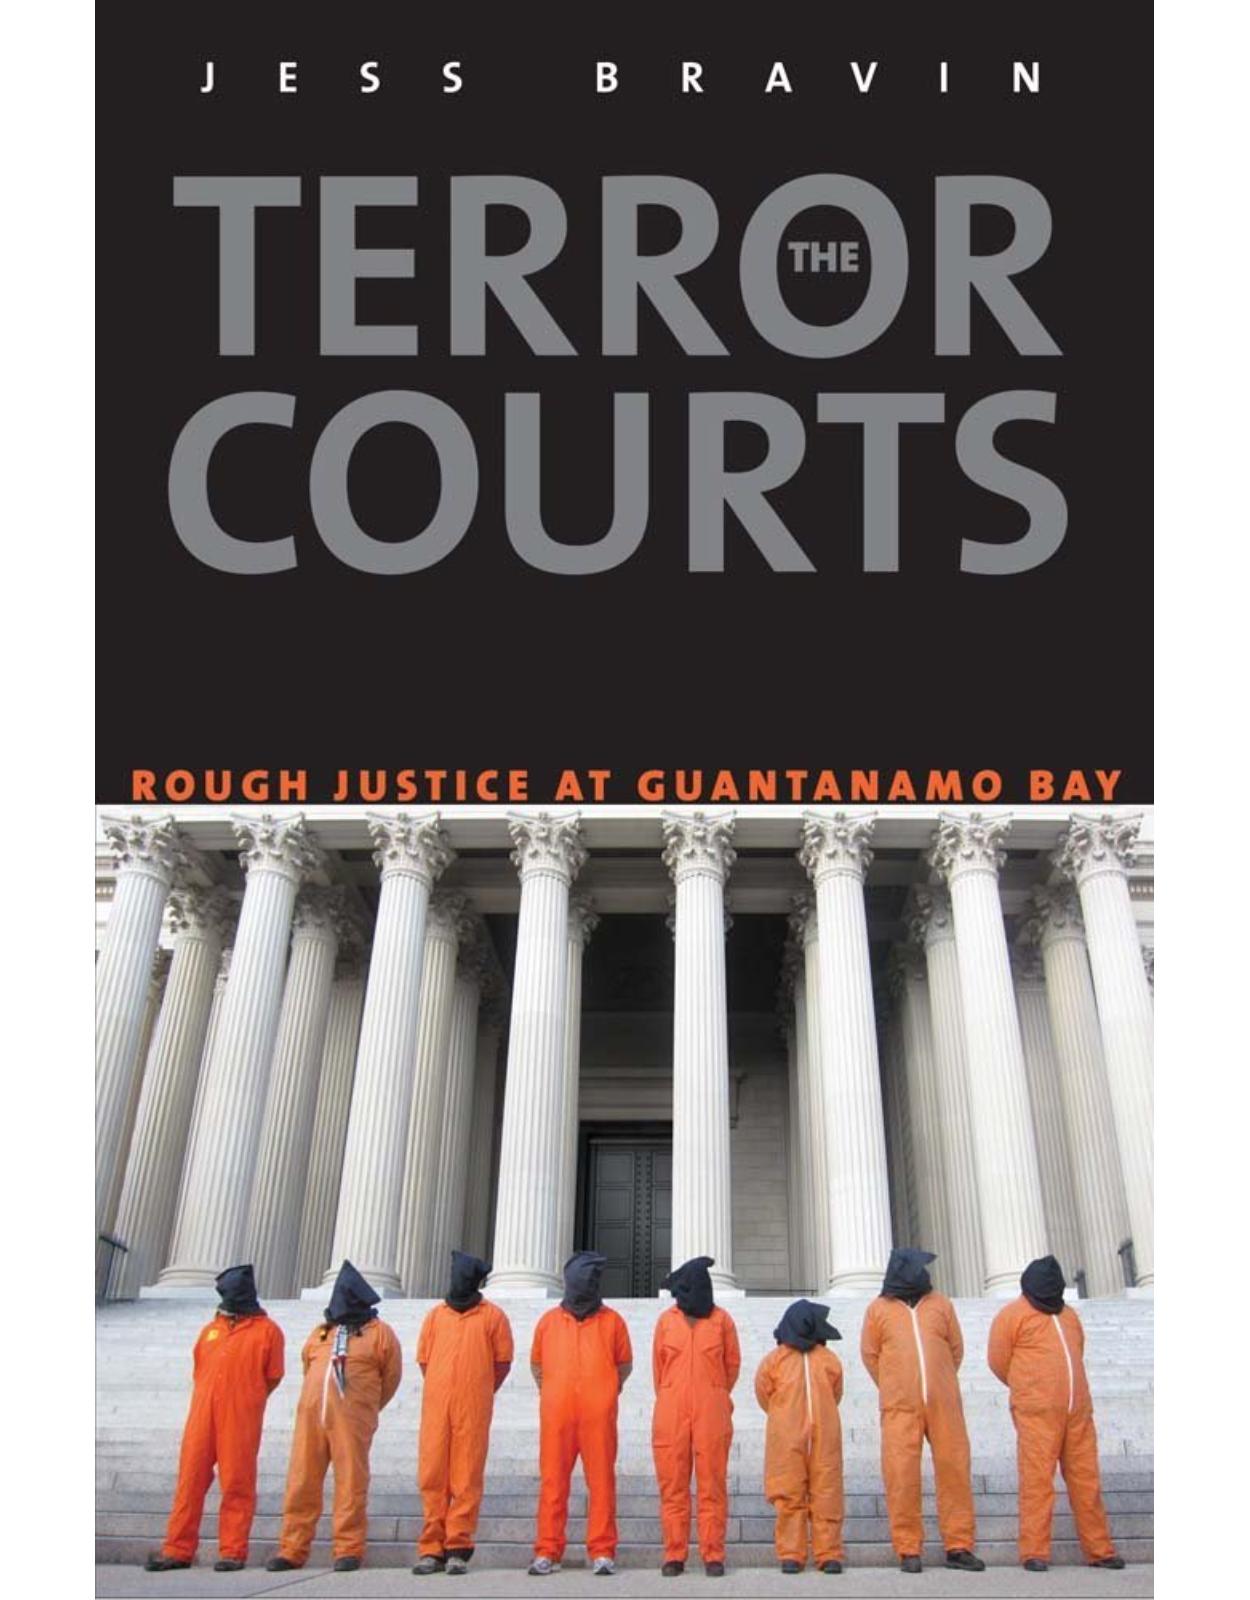 Terror Courts. America's Experiment with Rough Justice at Guantanamo Bay